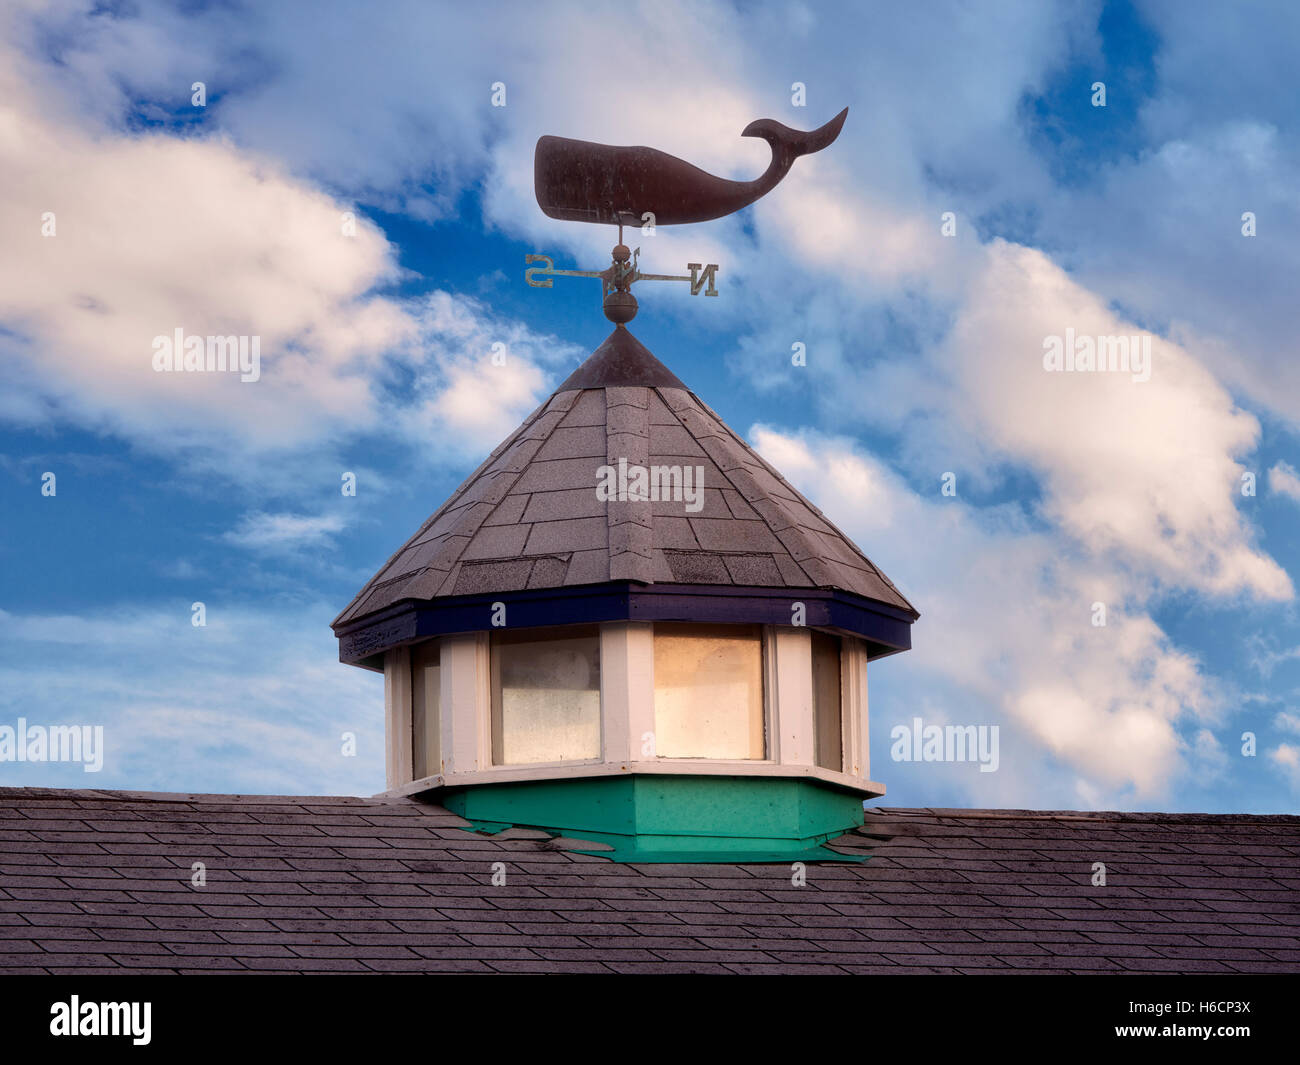 Roof top with whale weather vain. Fisherman's Wharf. Monterey, California Stock Photo